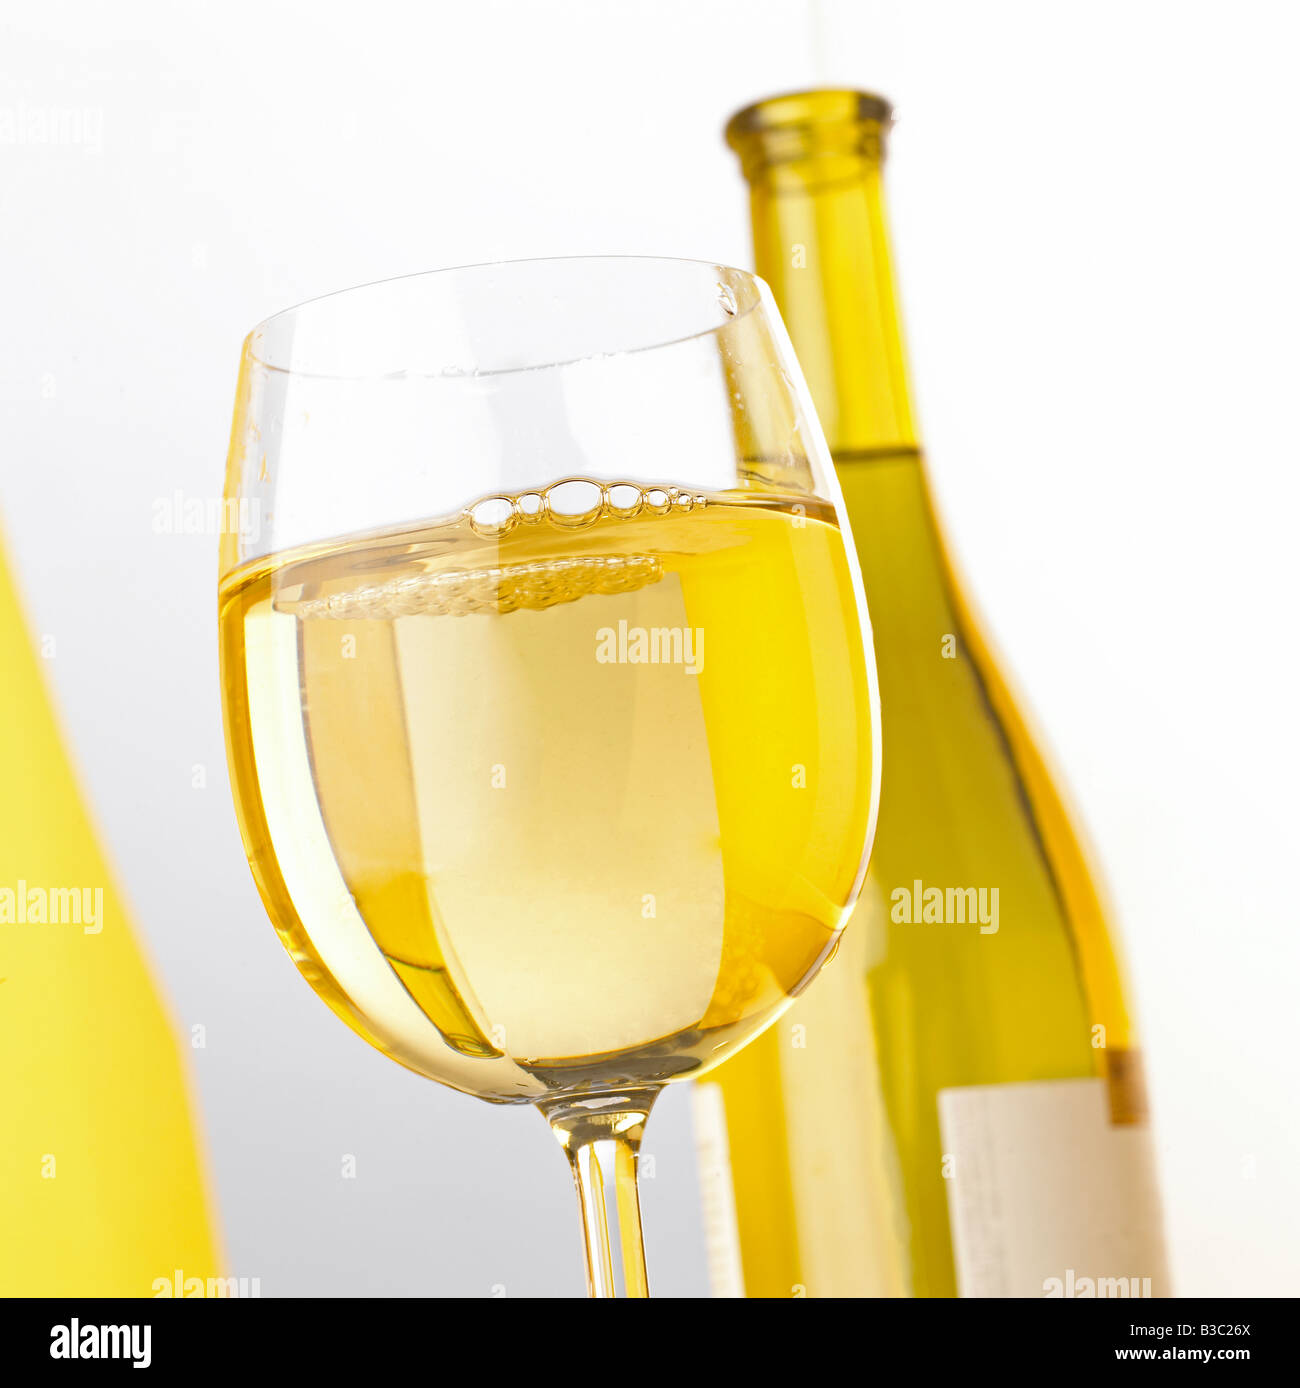 A bottle and glass of white wine Stock Photo